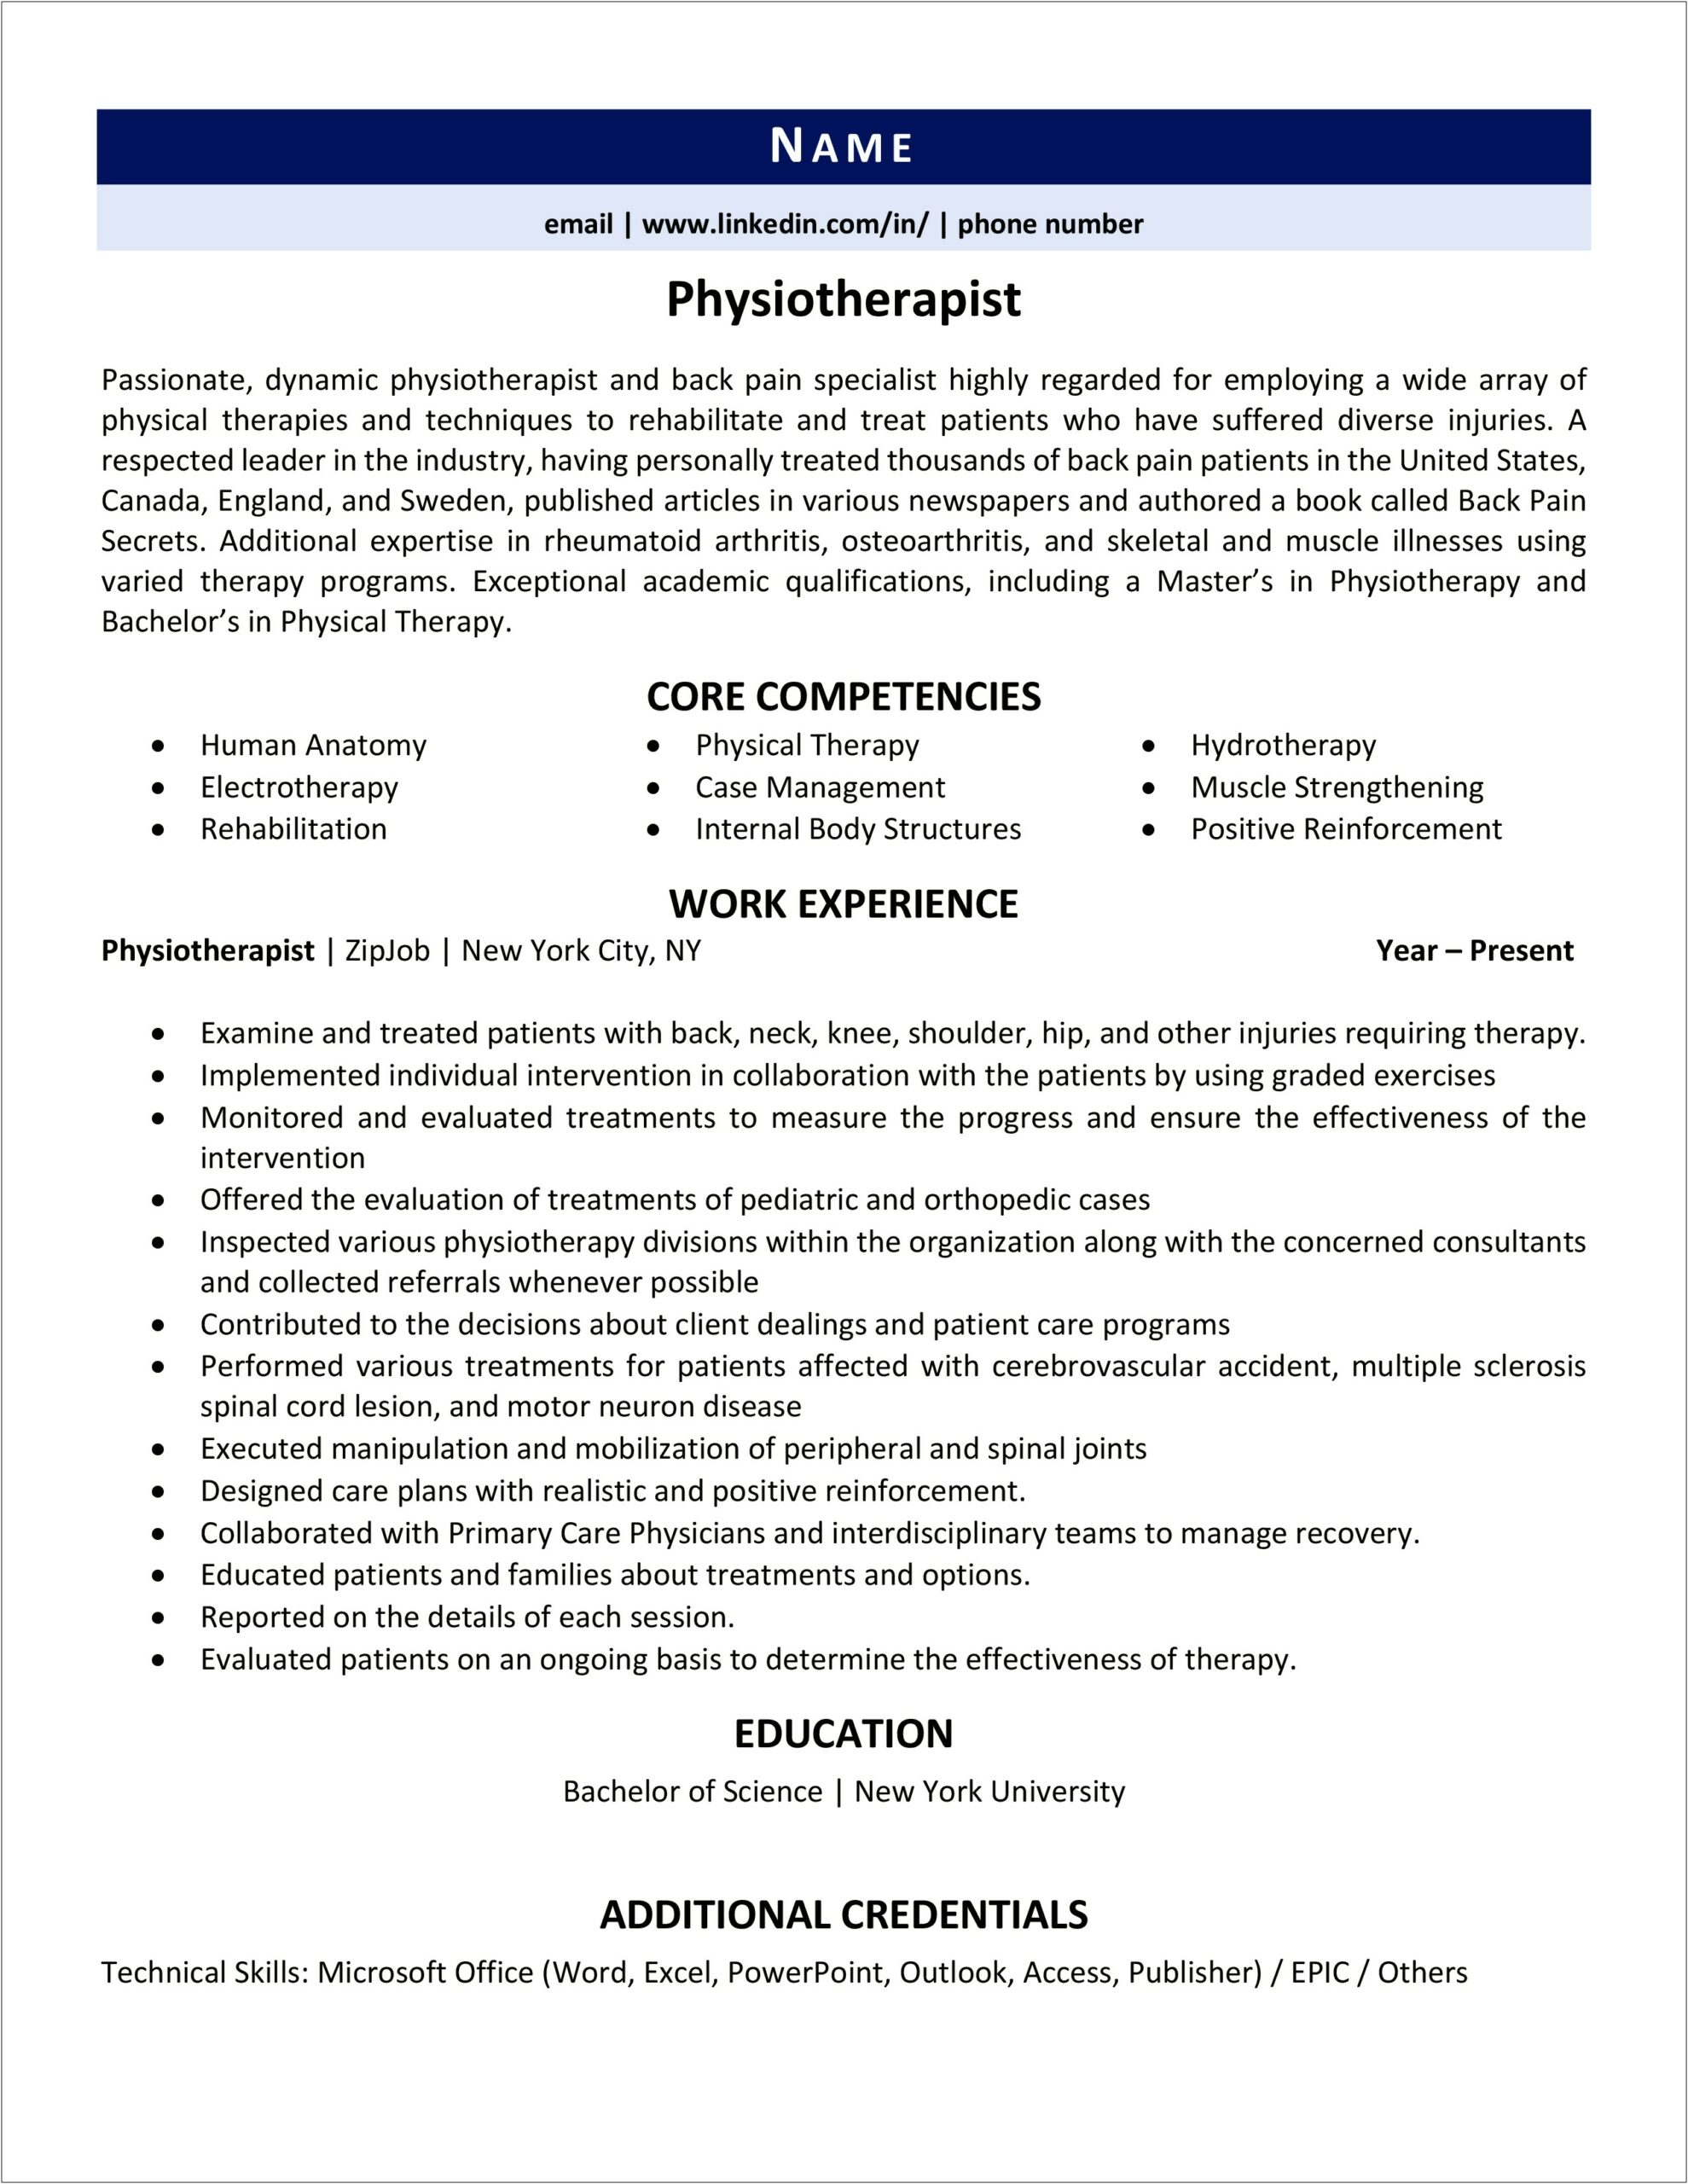 Skills For Physical Therapist Resume